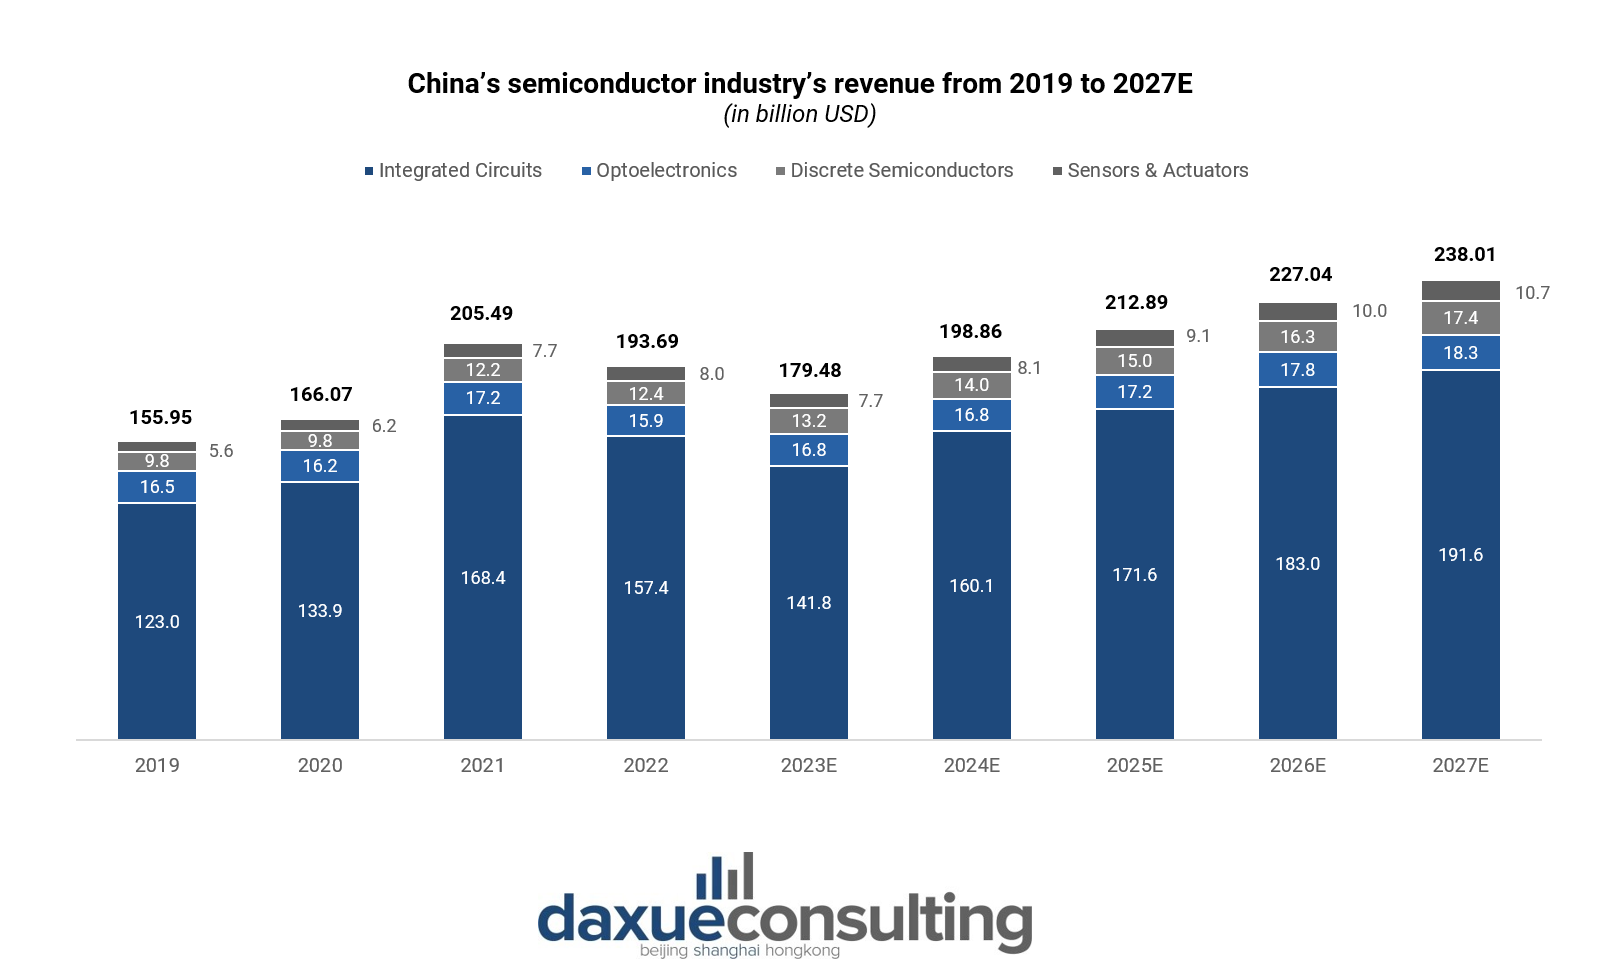  China’s semiconductor industry’s revenue from 2019 to 2027E